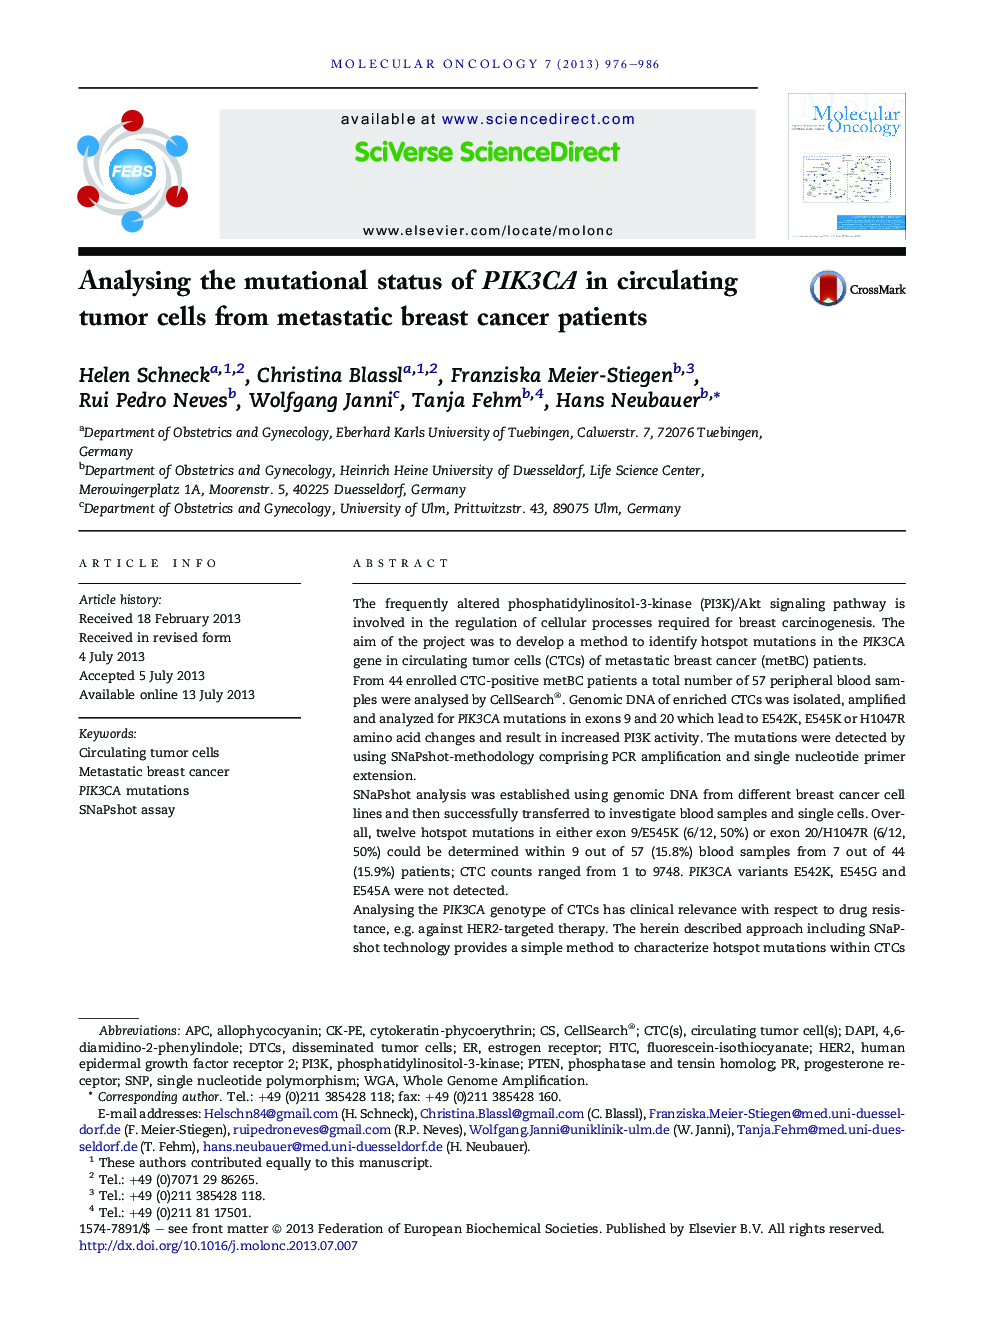 Analysing the mutational status of PIK3CA in circulating tumor cells from metastatic breast cancer patients